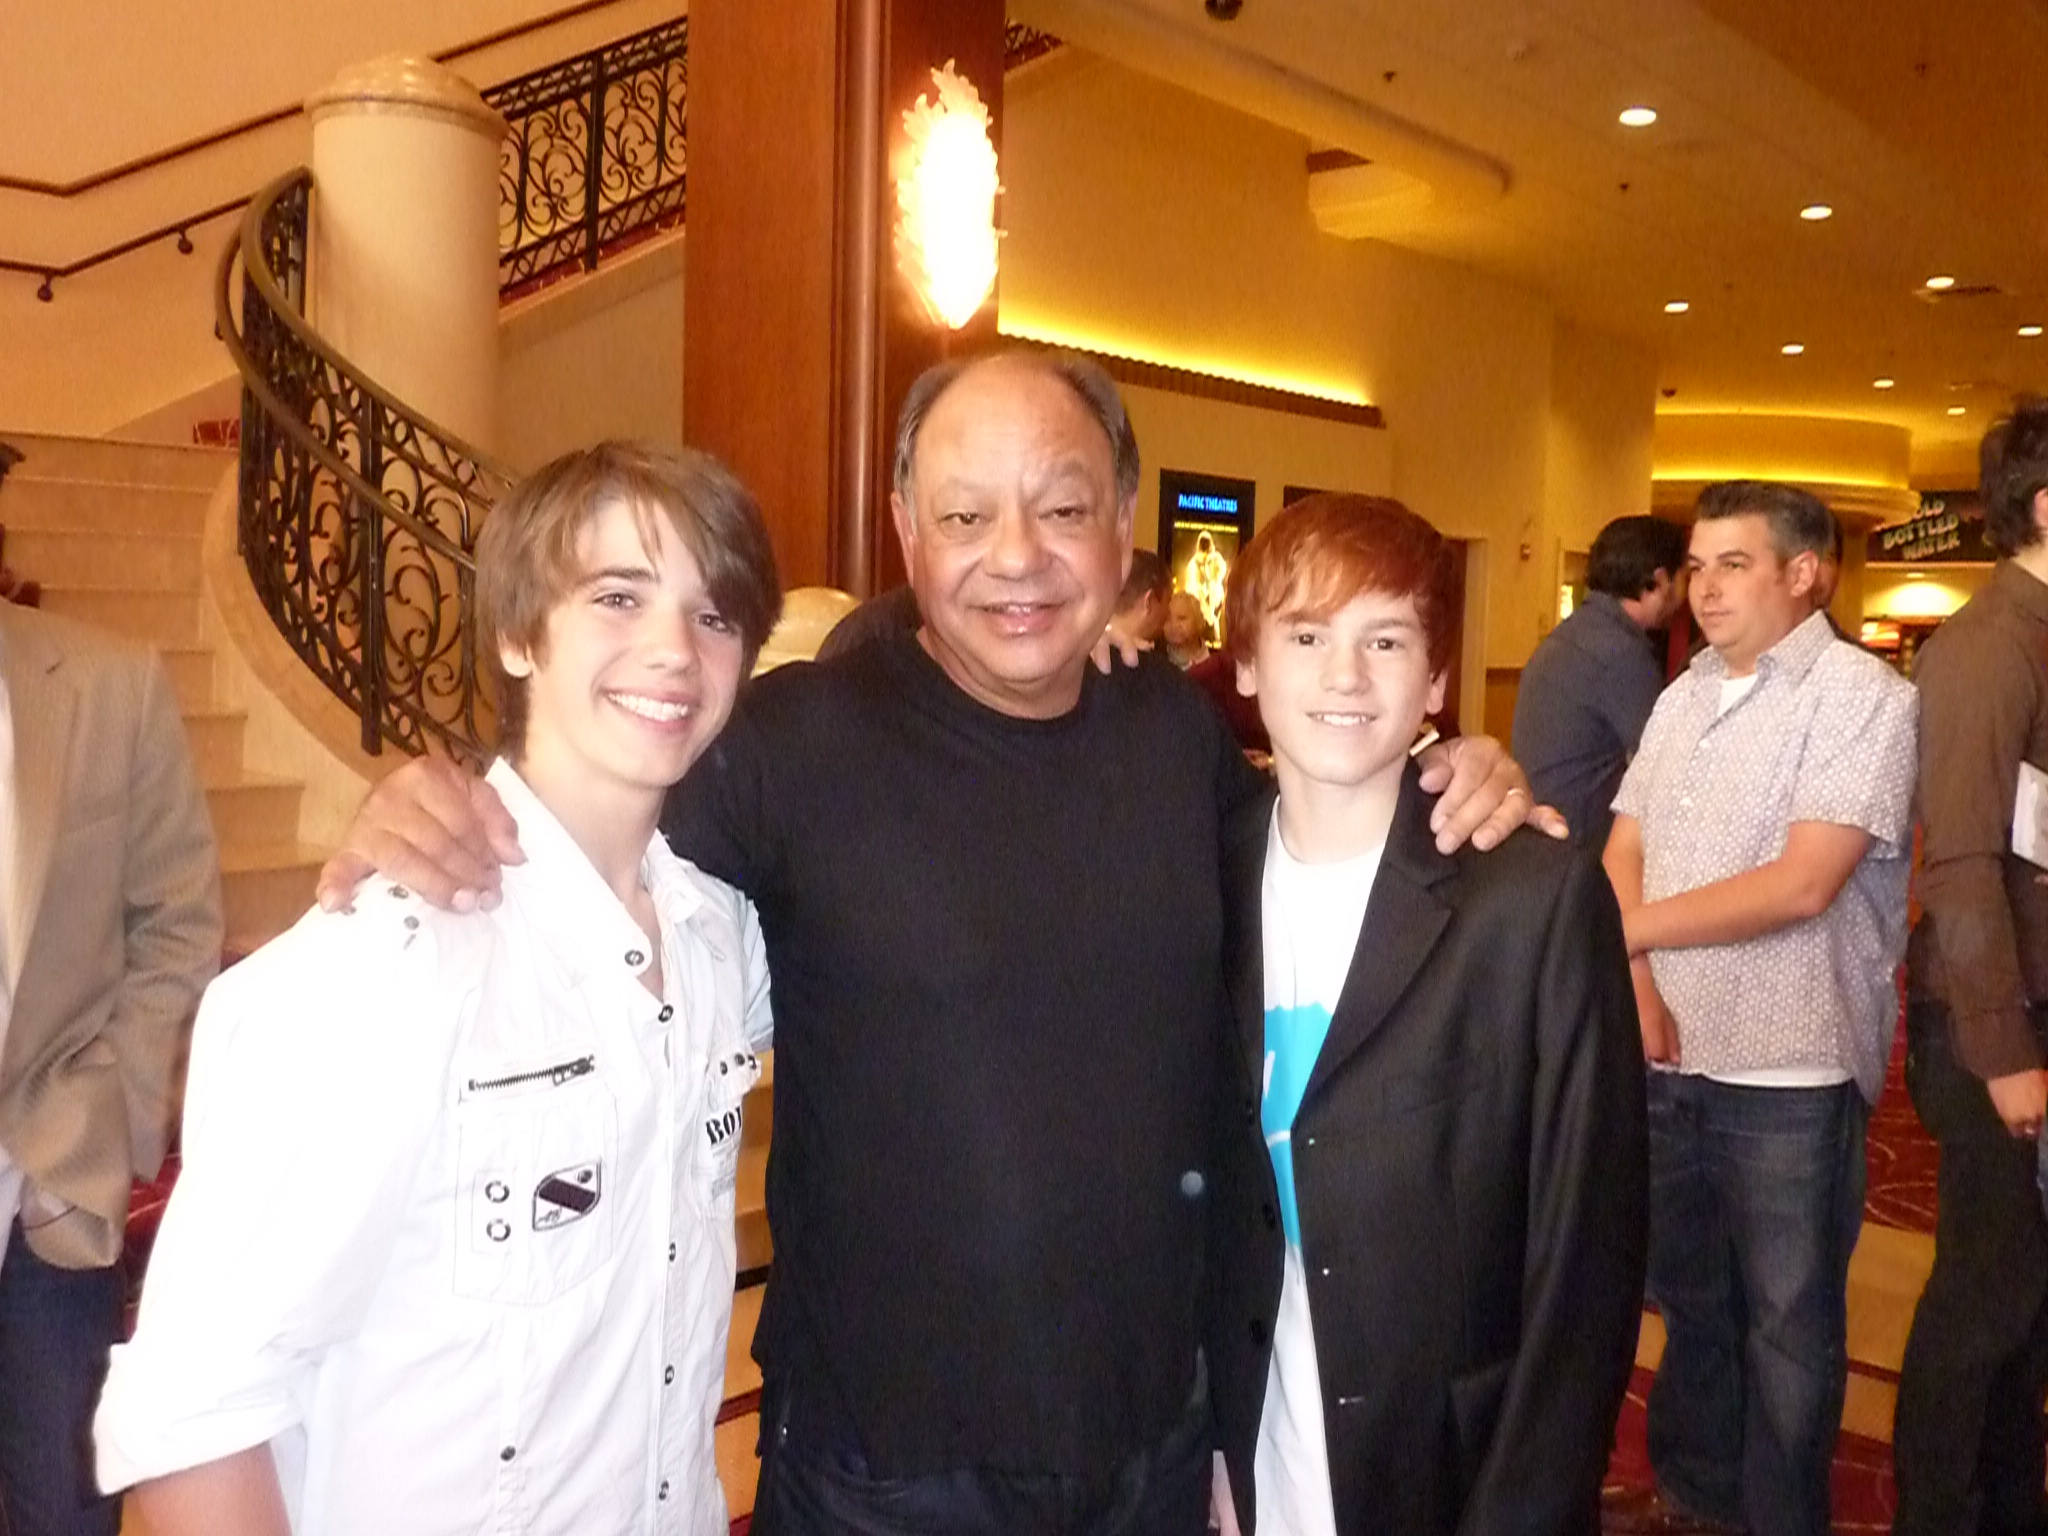 Justin Tinucci , Cheech Marin and Brandon Tyler Russell at the premiere of Hoodwinked Too!